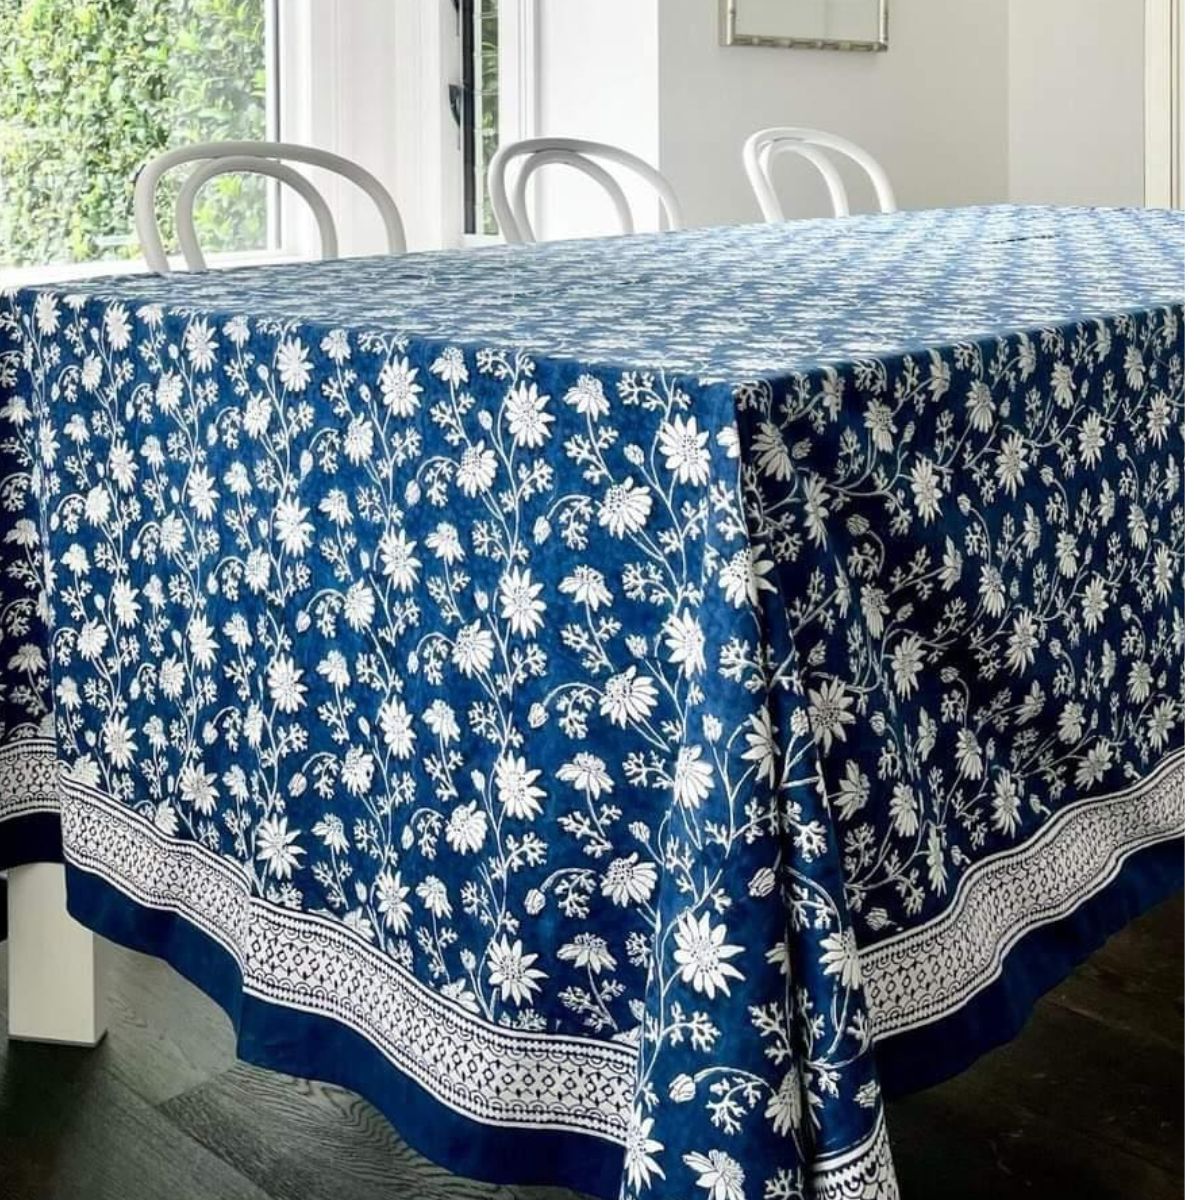 Flannel flower navy blue tablecloth ©